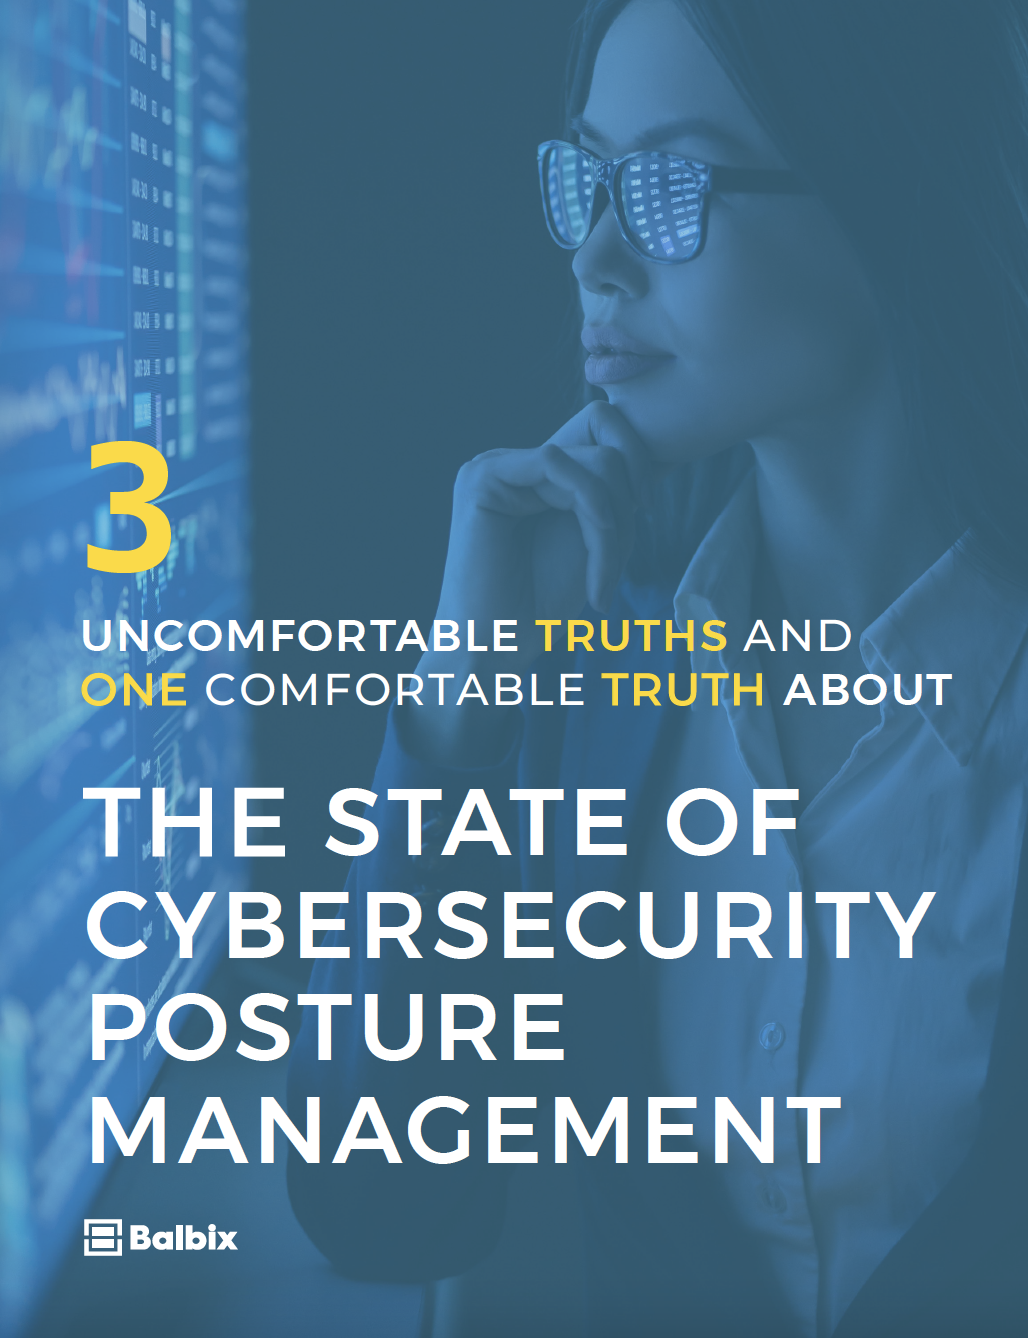 Truths About the State of Cybersecurity Posture Management